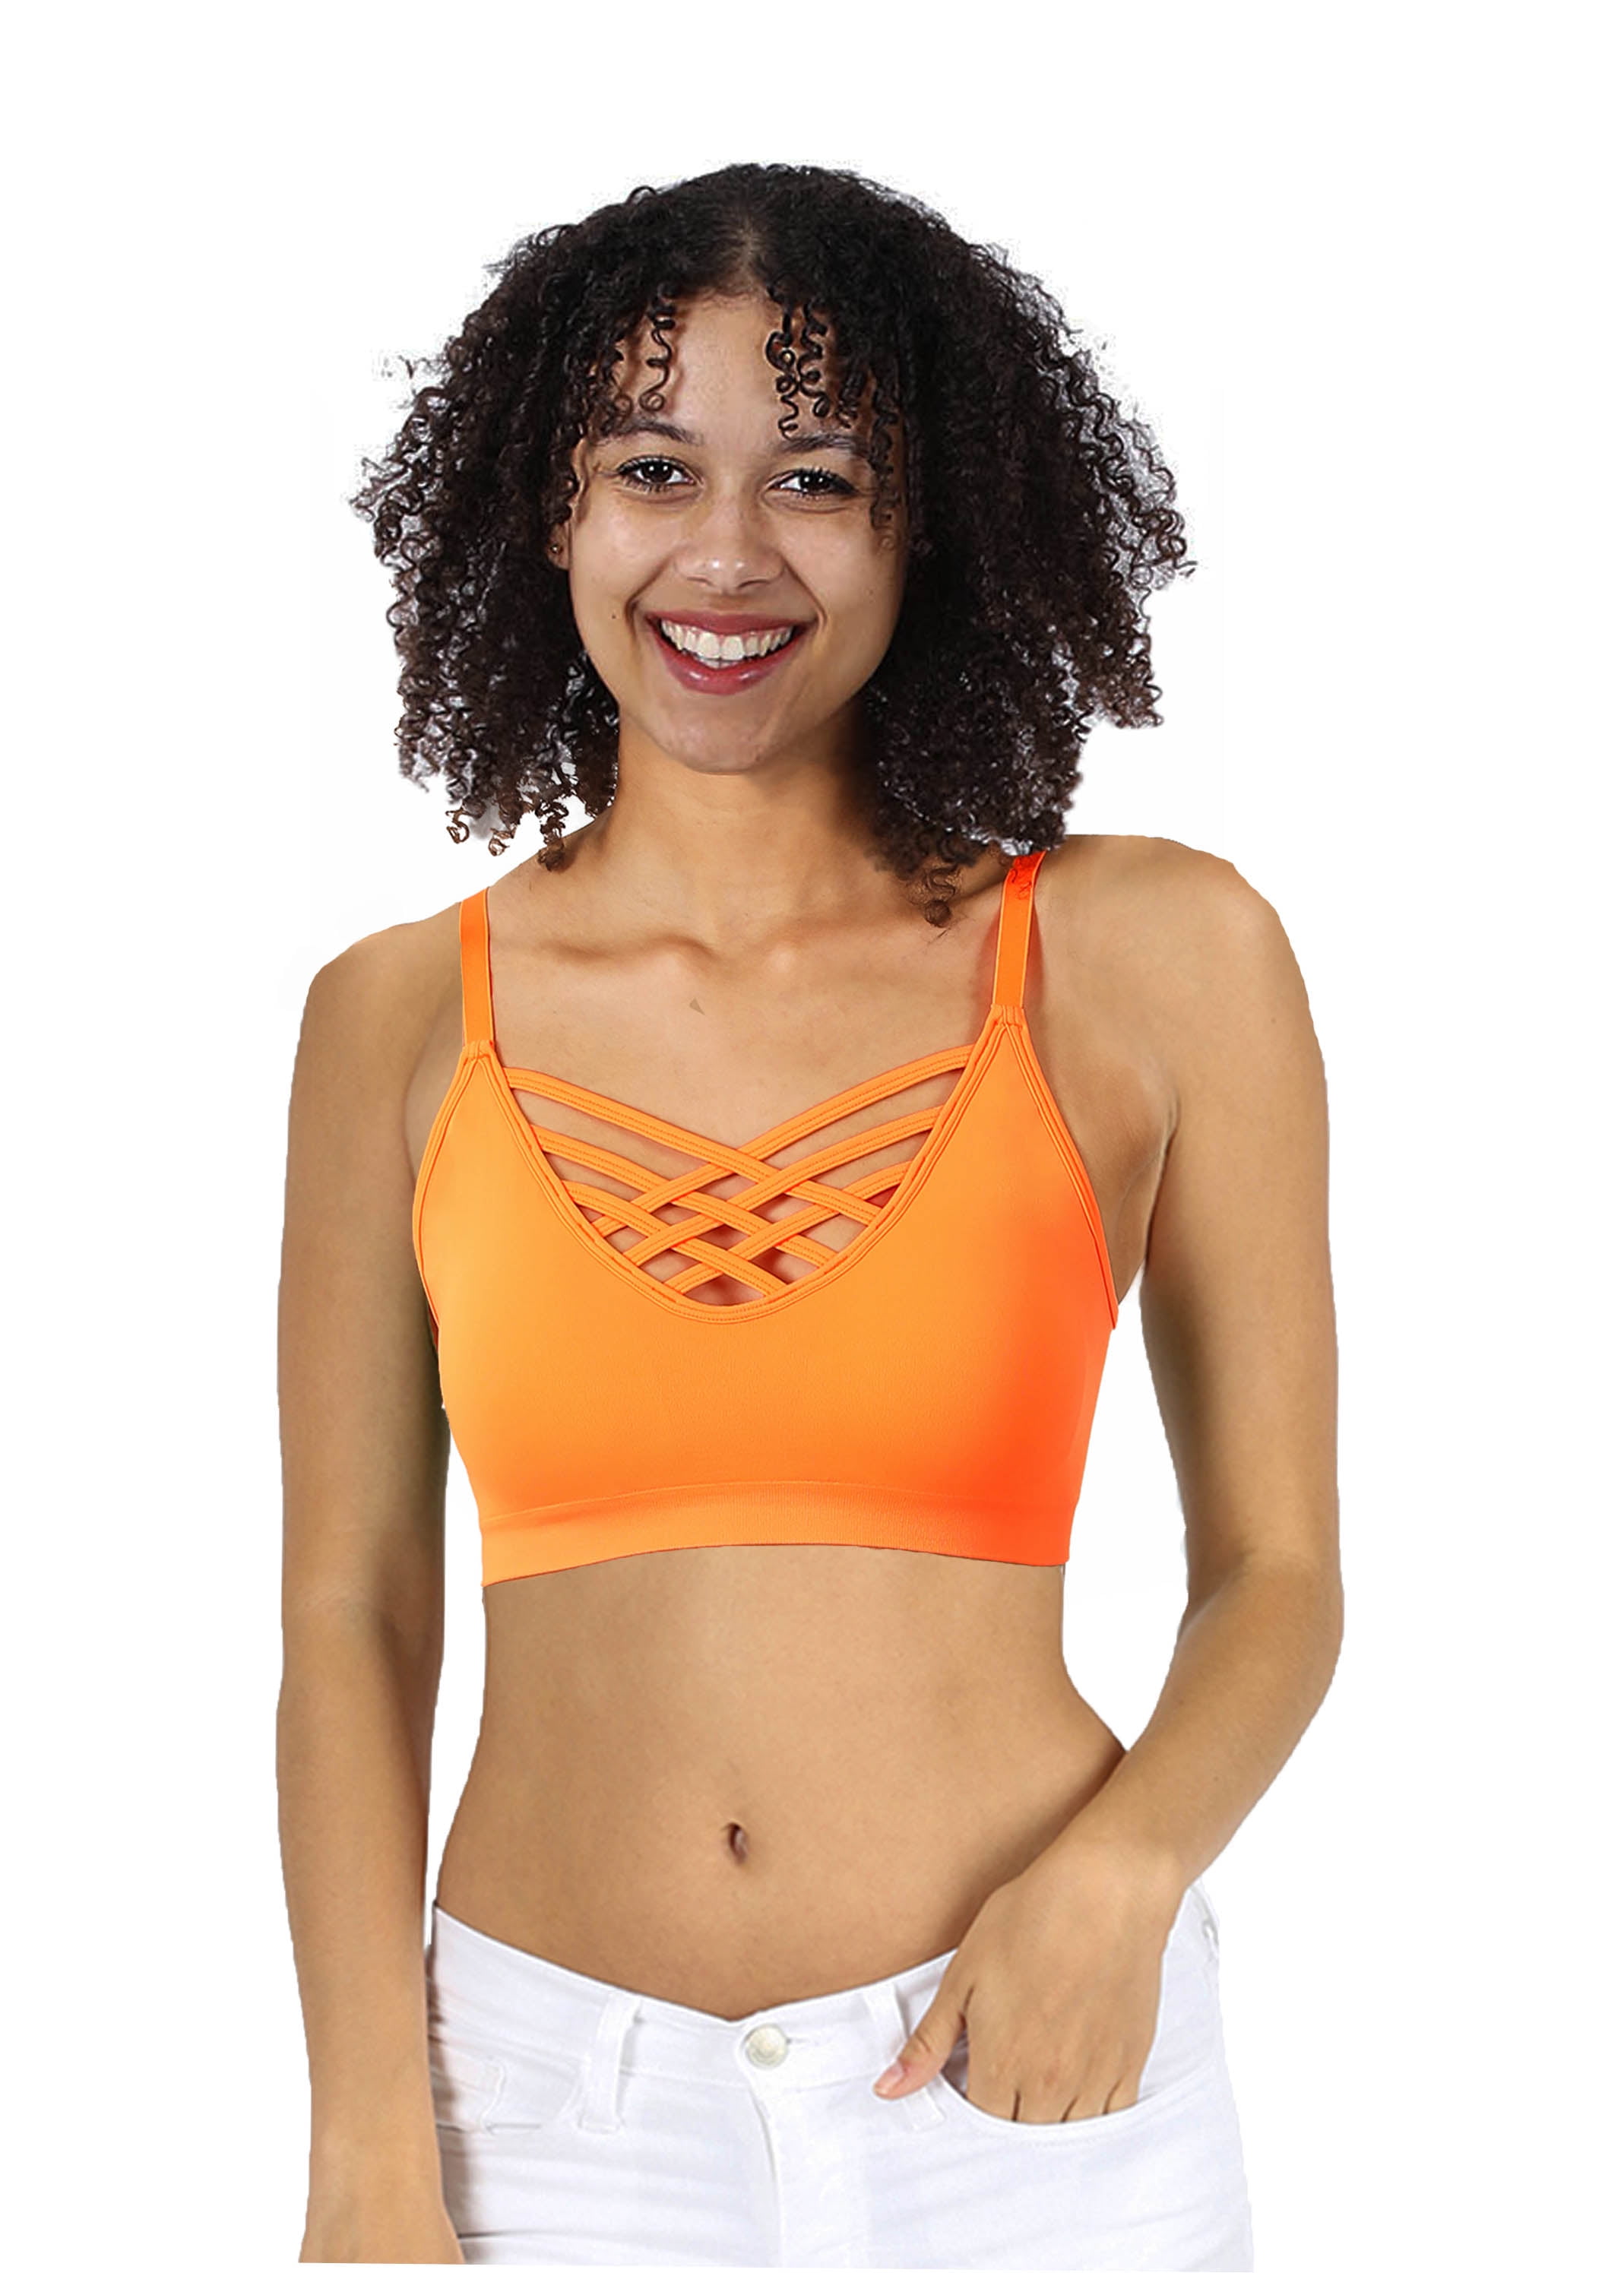 Women's Sexy Cross Strappy Wirefree Sports Bra Bralette with Removable Pads  (Bright Orange, LXL) 